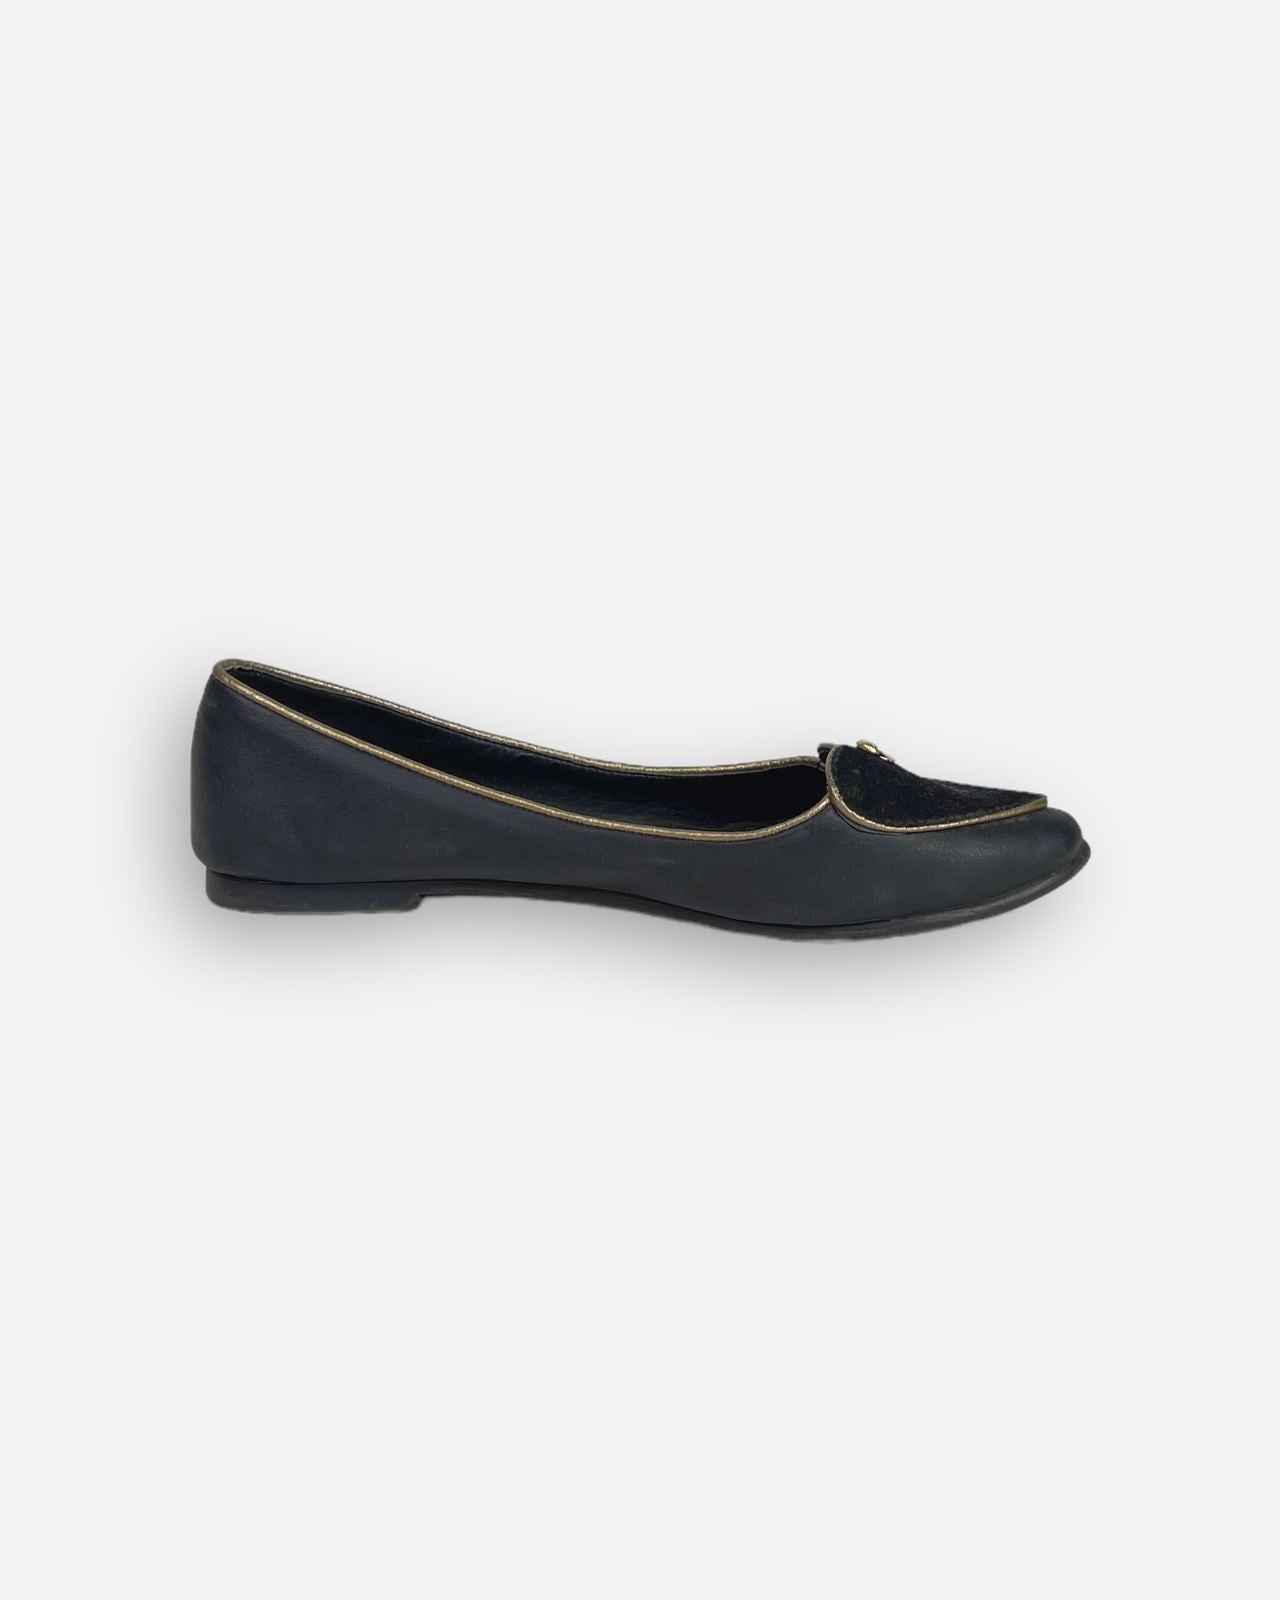 Flats Loly in the sky T. 24.5 MX — 7.5 US